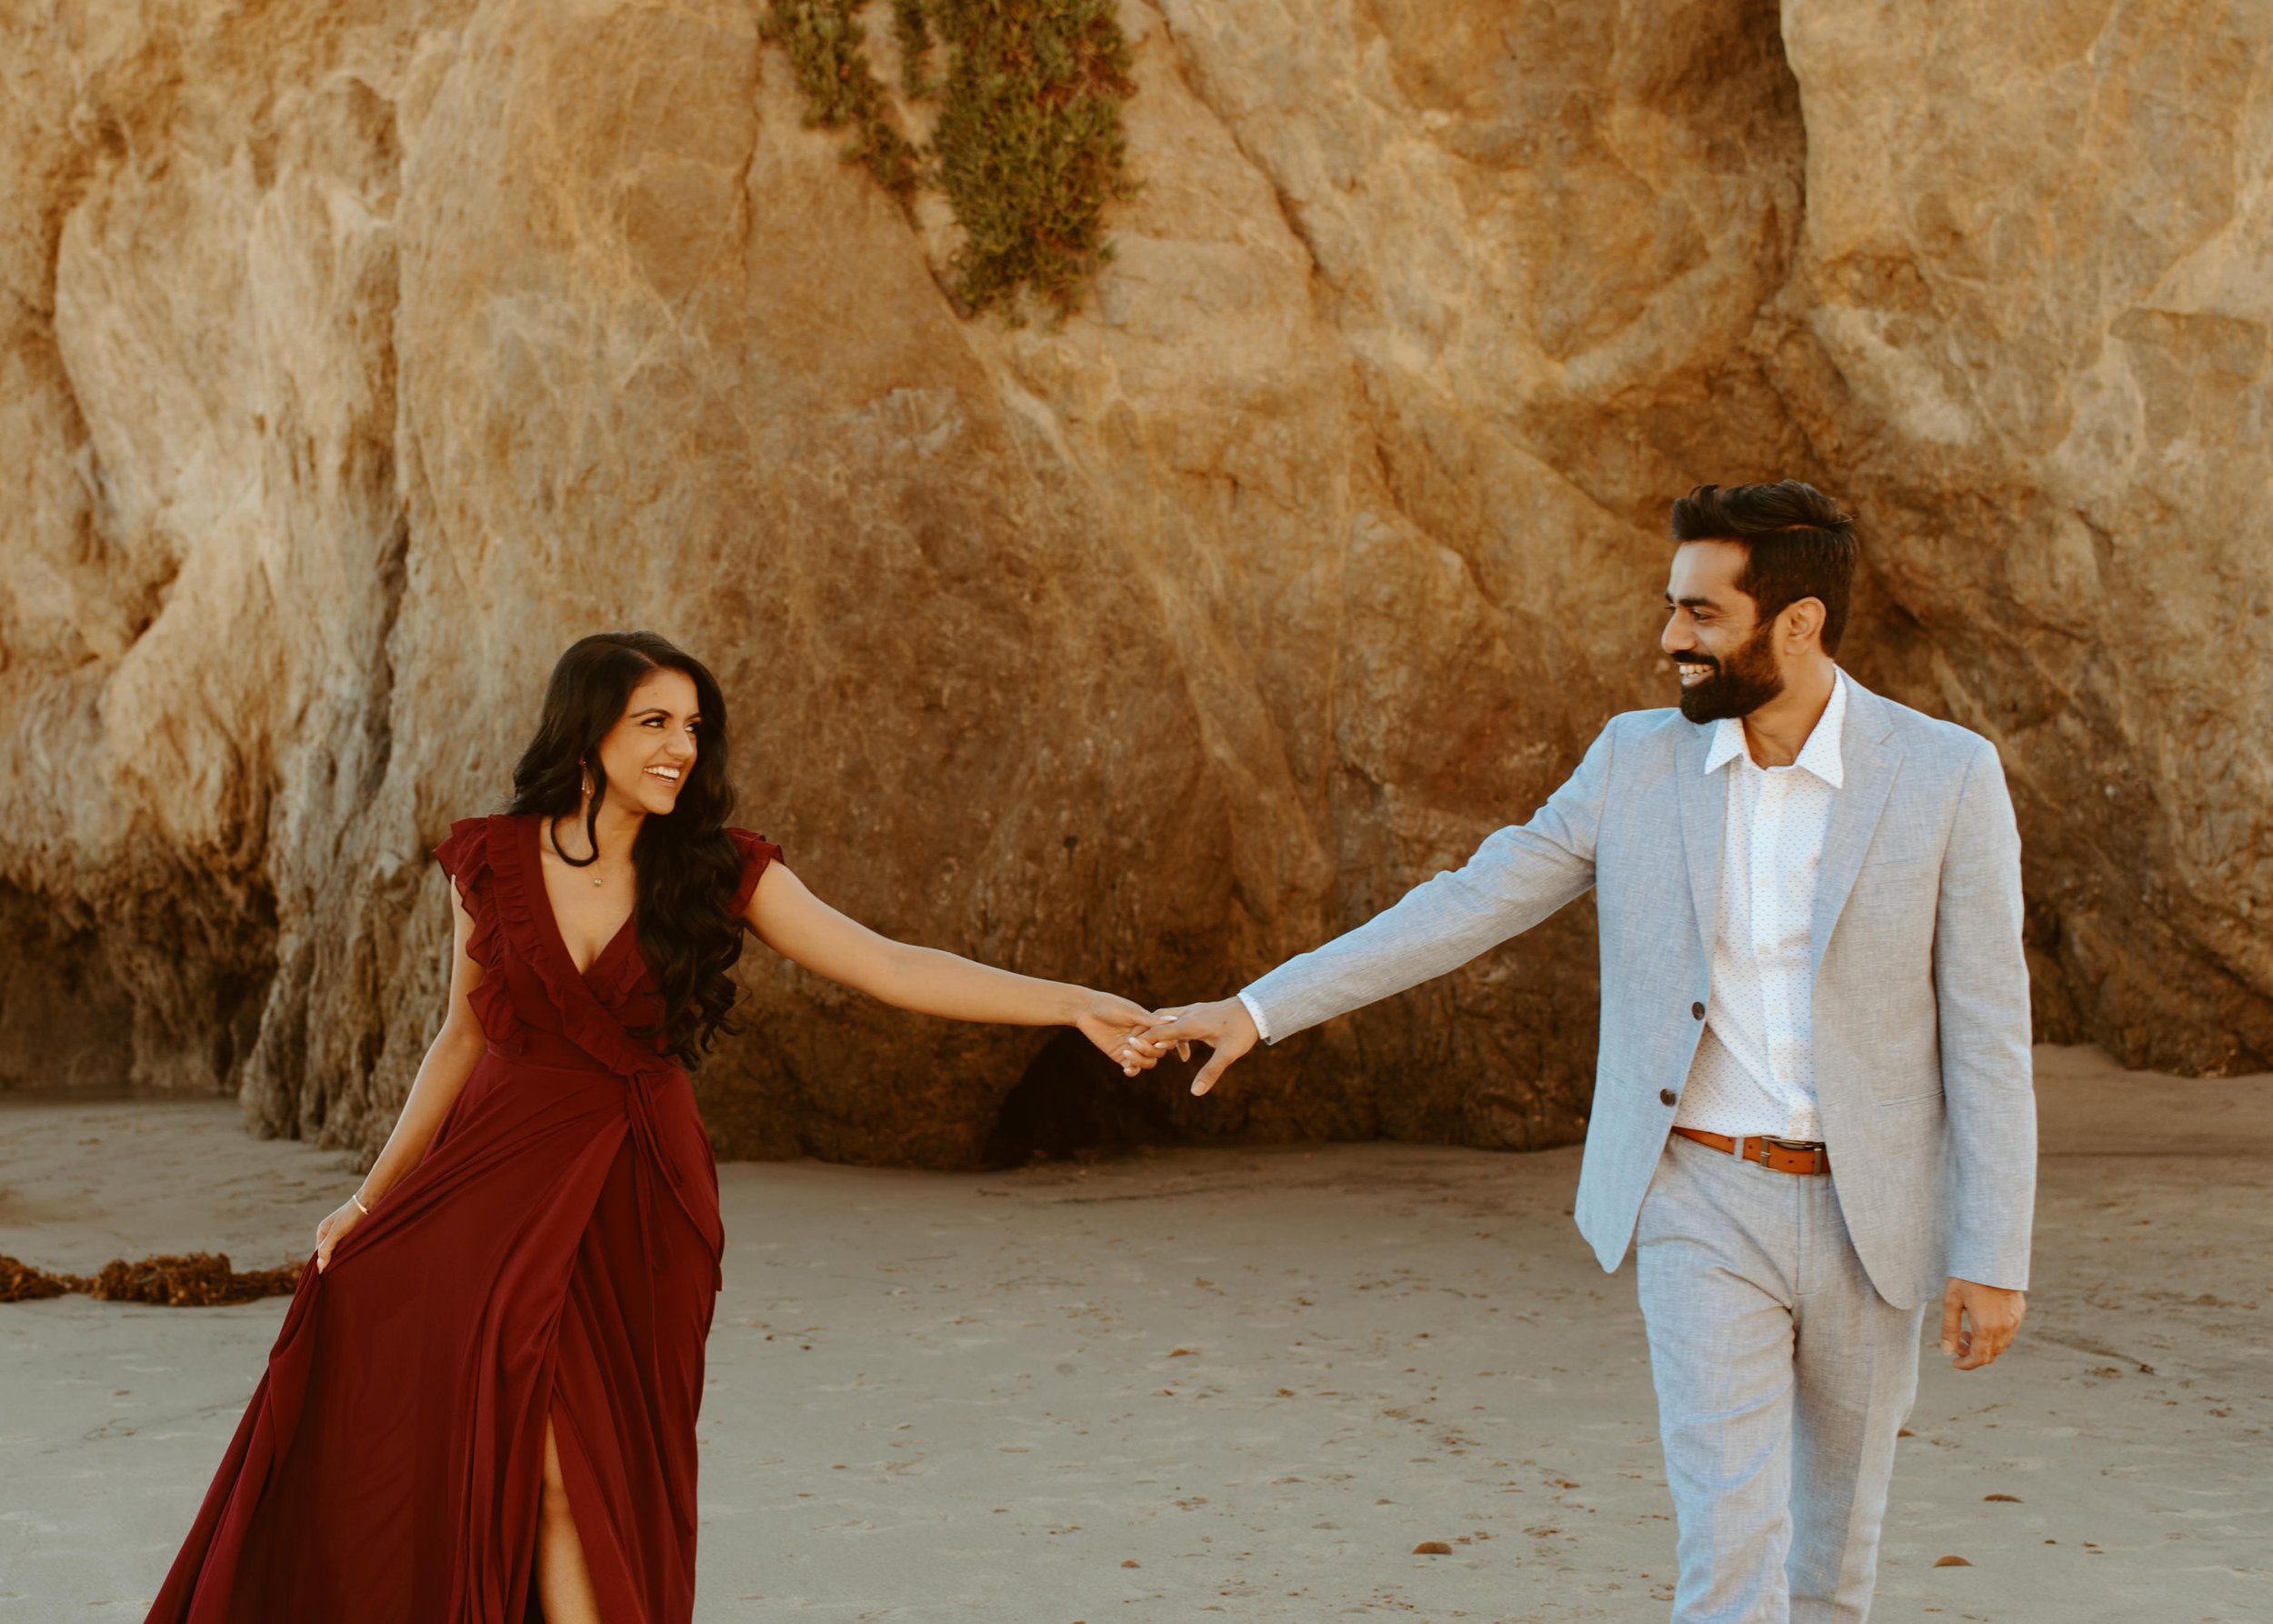 Cute Engagement Pics Plus The Love Story Behind Them! | Indian wedding  photography poses, Photo poses for couples, Engagement photography poses